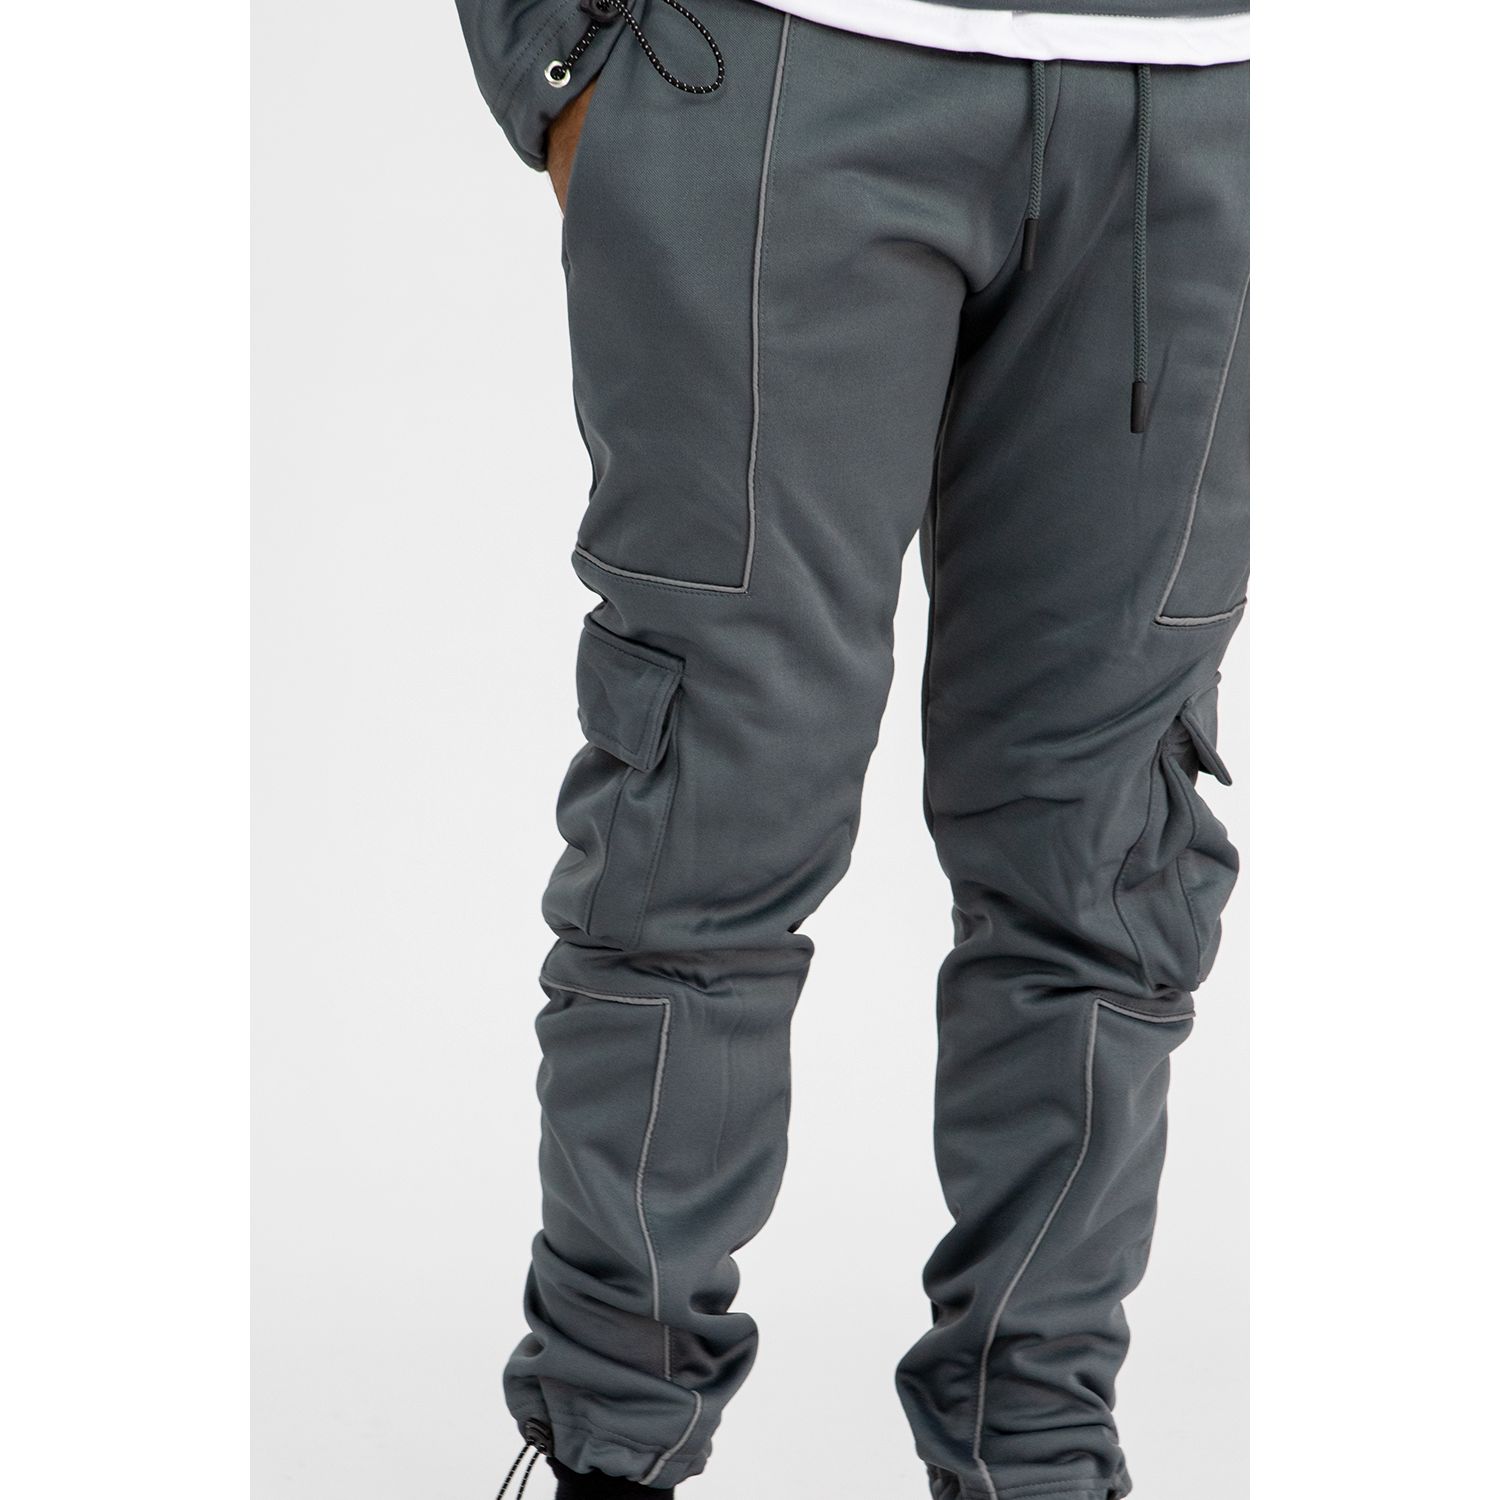 Wholesale Black Reflective Piped Cargo Pockets Tracksuit